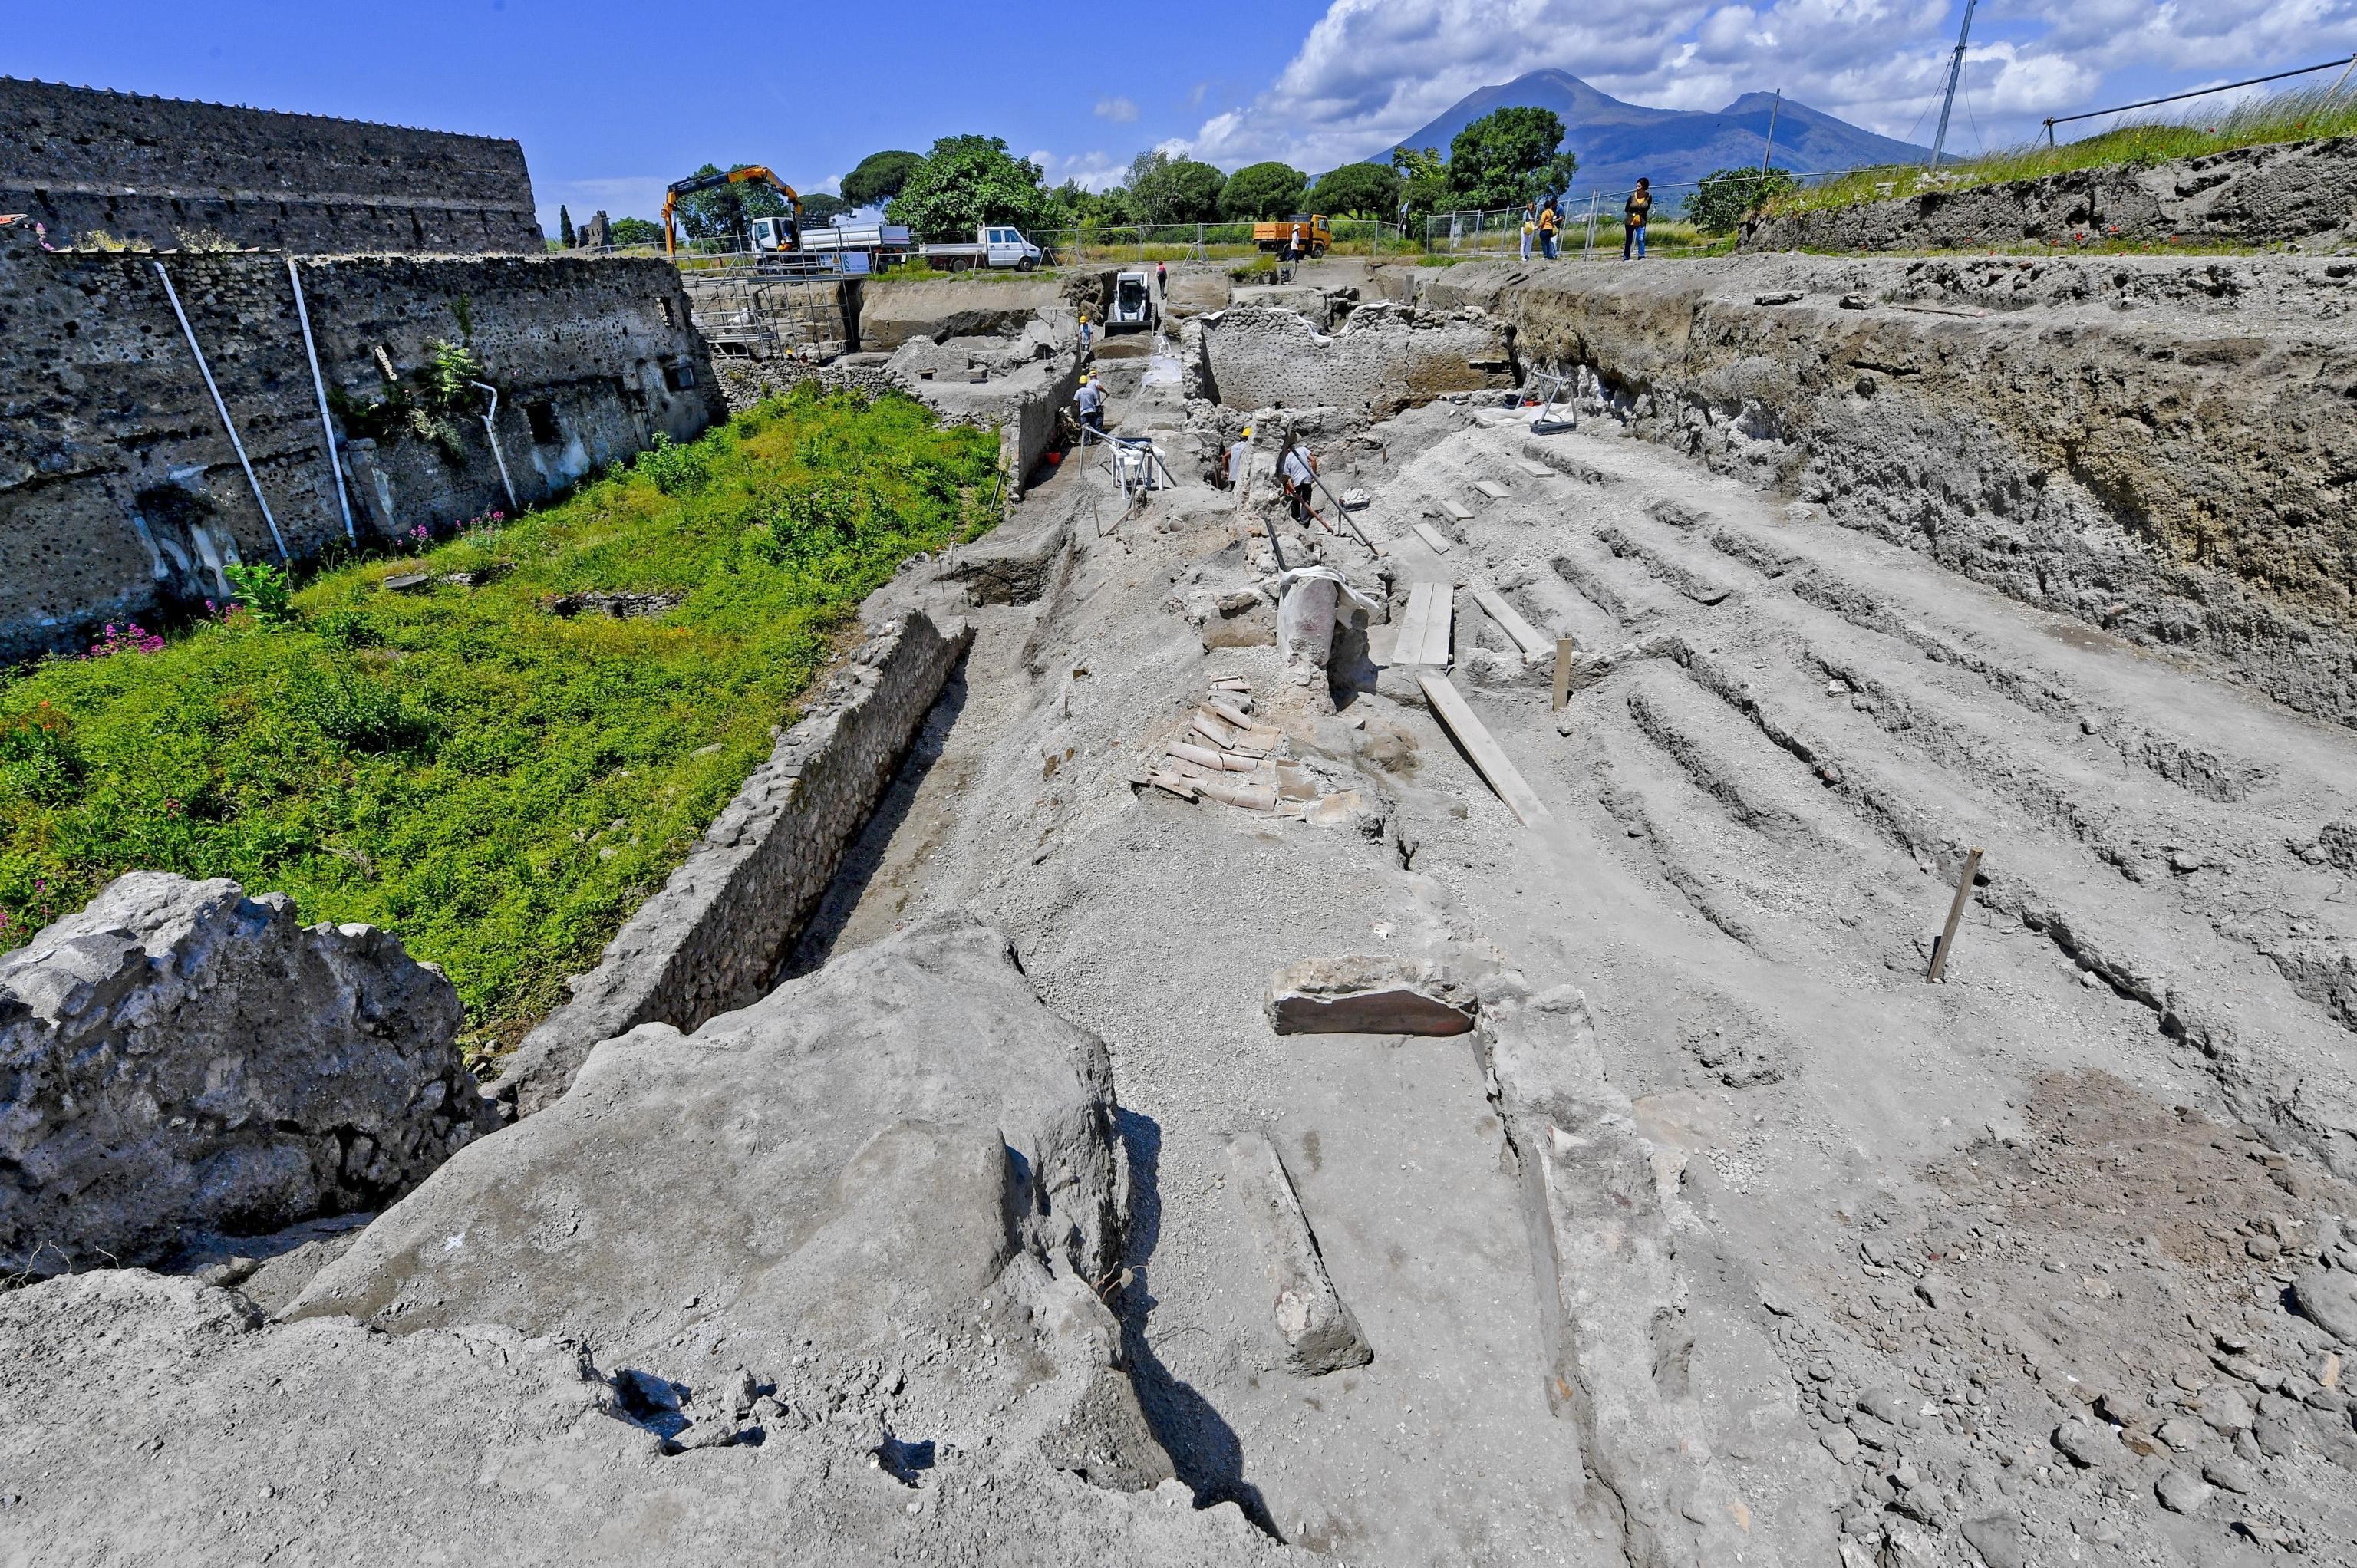 Archaeologists inspect excavation works in the archaeological site of Pompeii where they discovered a street of houses with intact balconies that were buried when Mt Vesuvius erupted in 79AD. Photo: AP